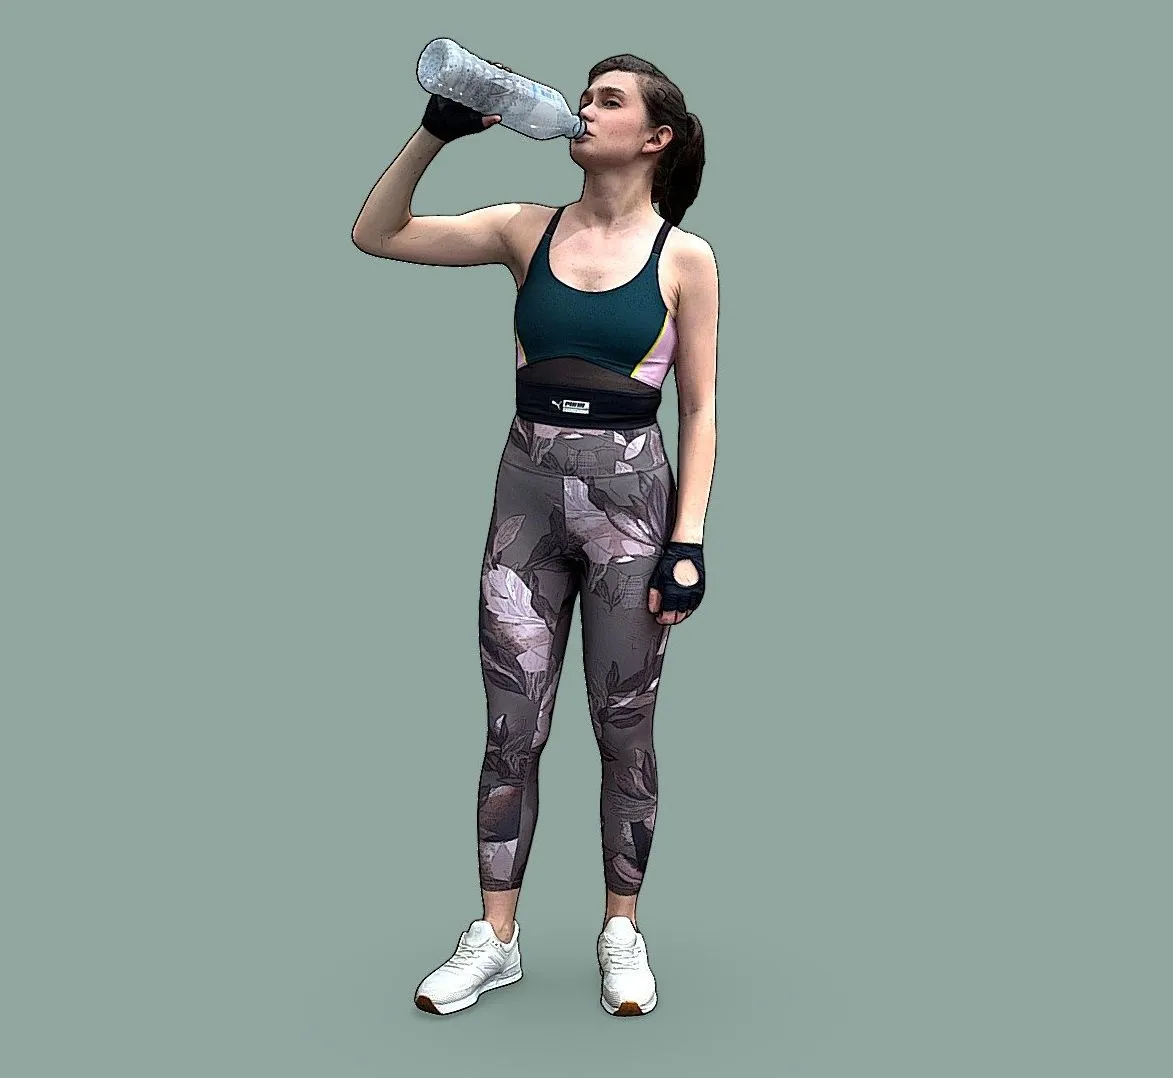 PBR Game 3D Model – Stylized Fitness Character Drinking